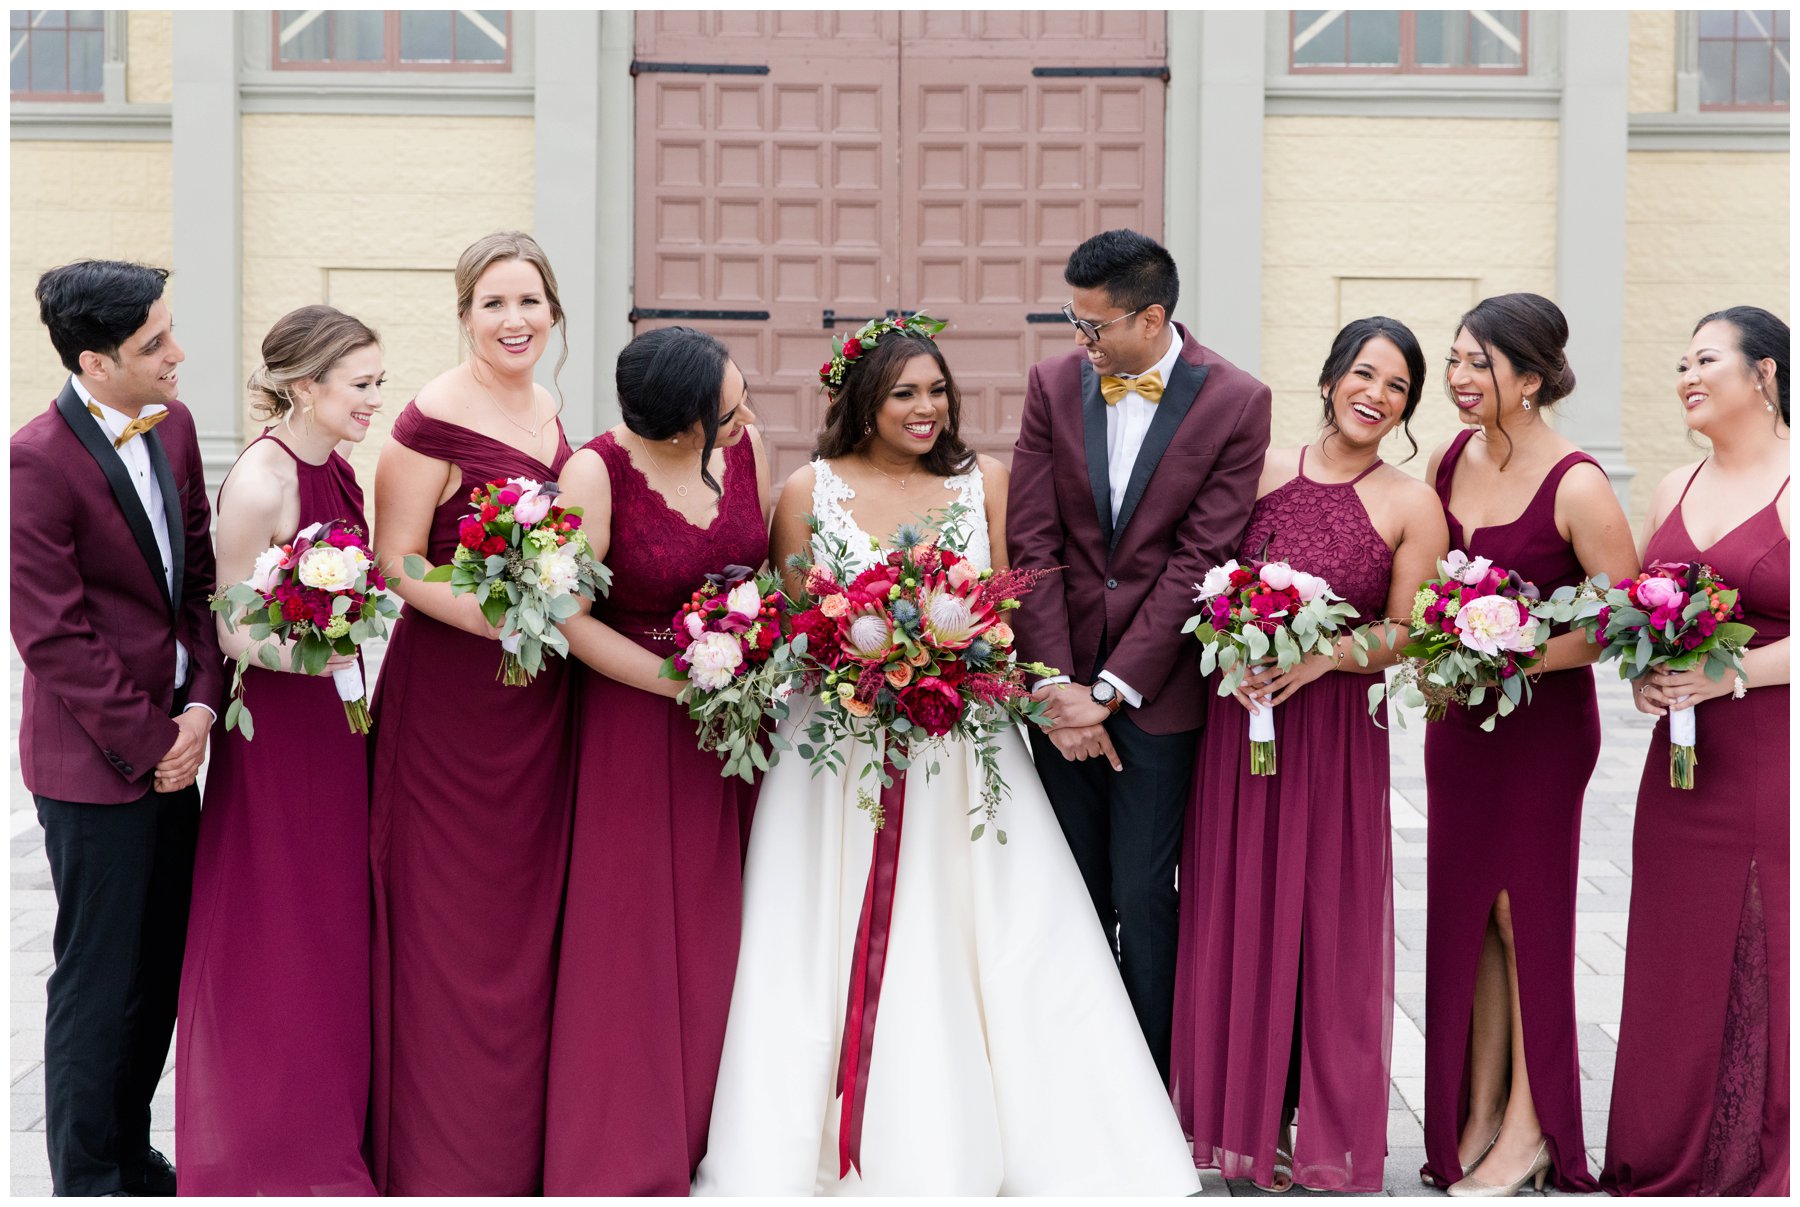 Burgundy bridesmaids and bridesman at the Horticulture Building